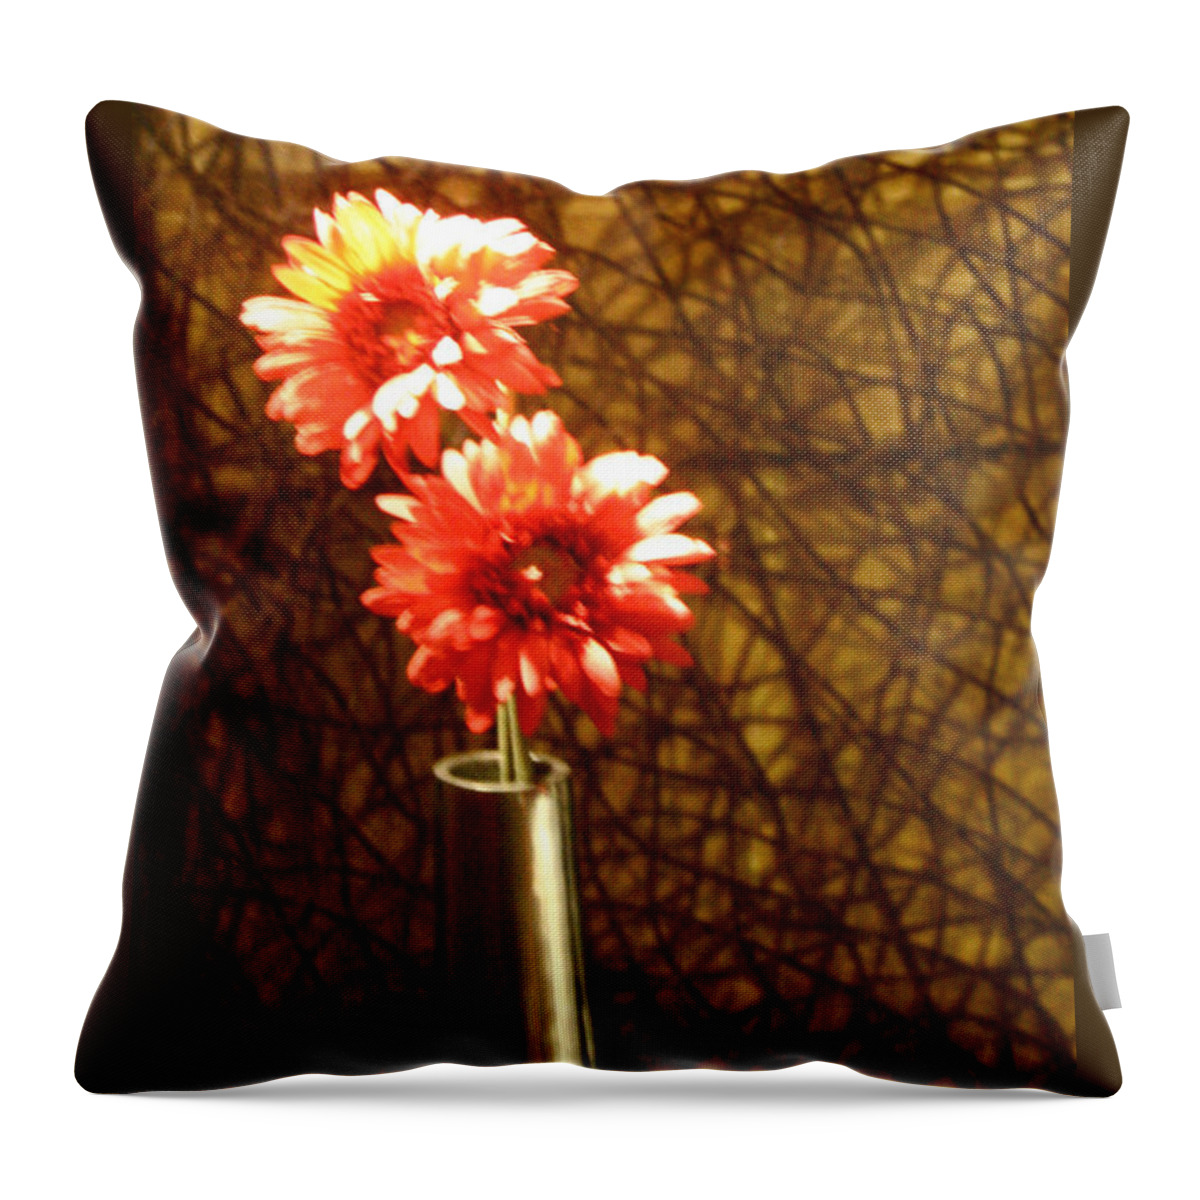 Flowers Throw Pillow featuring the digital art A Perfect Vase by Joseph Coulombe